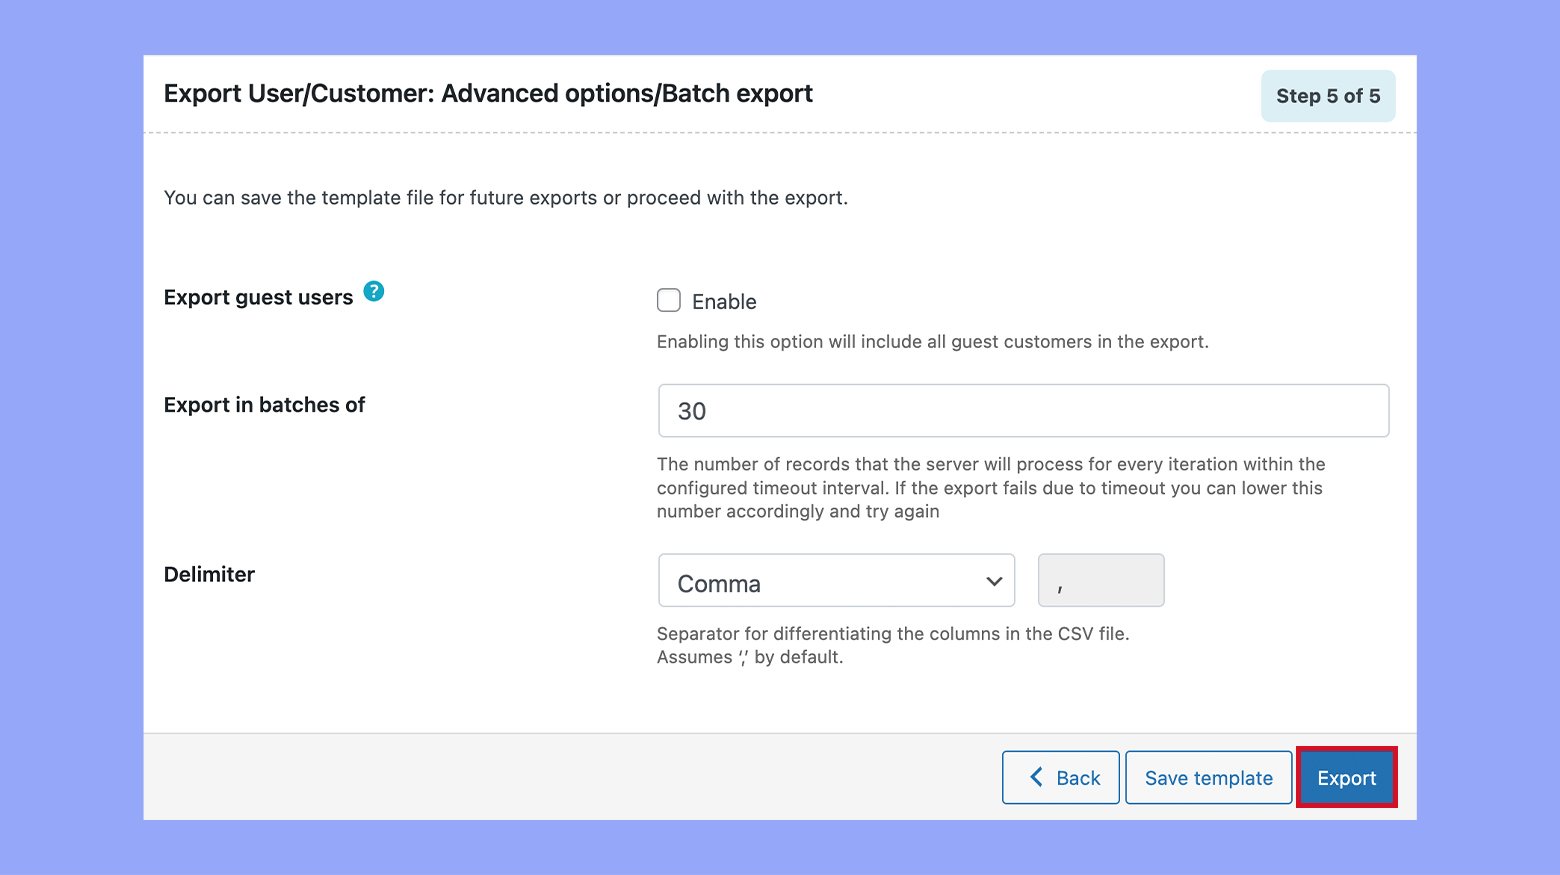 Proceed with all the steps to export data